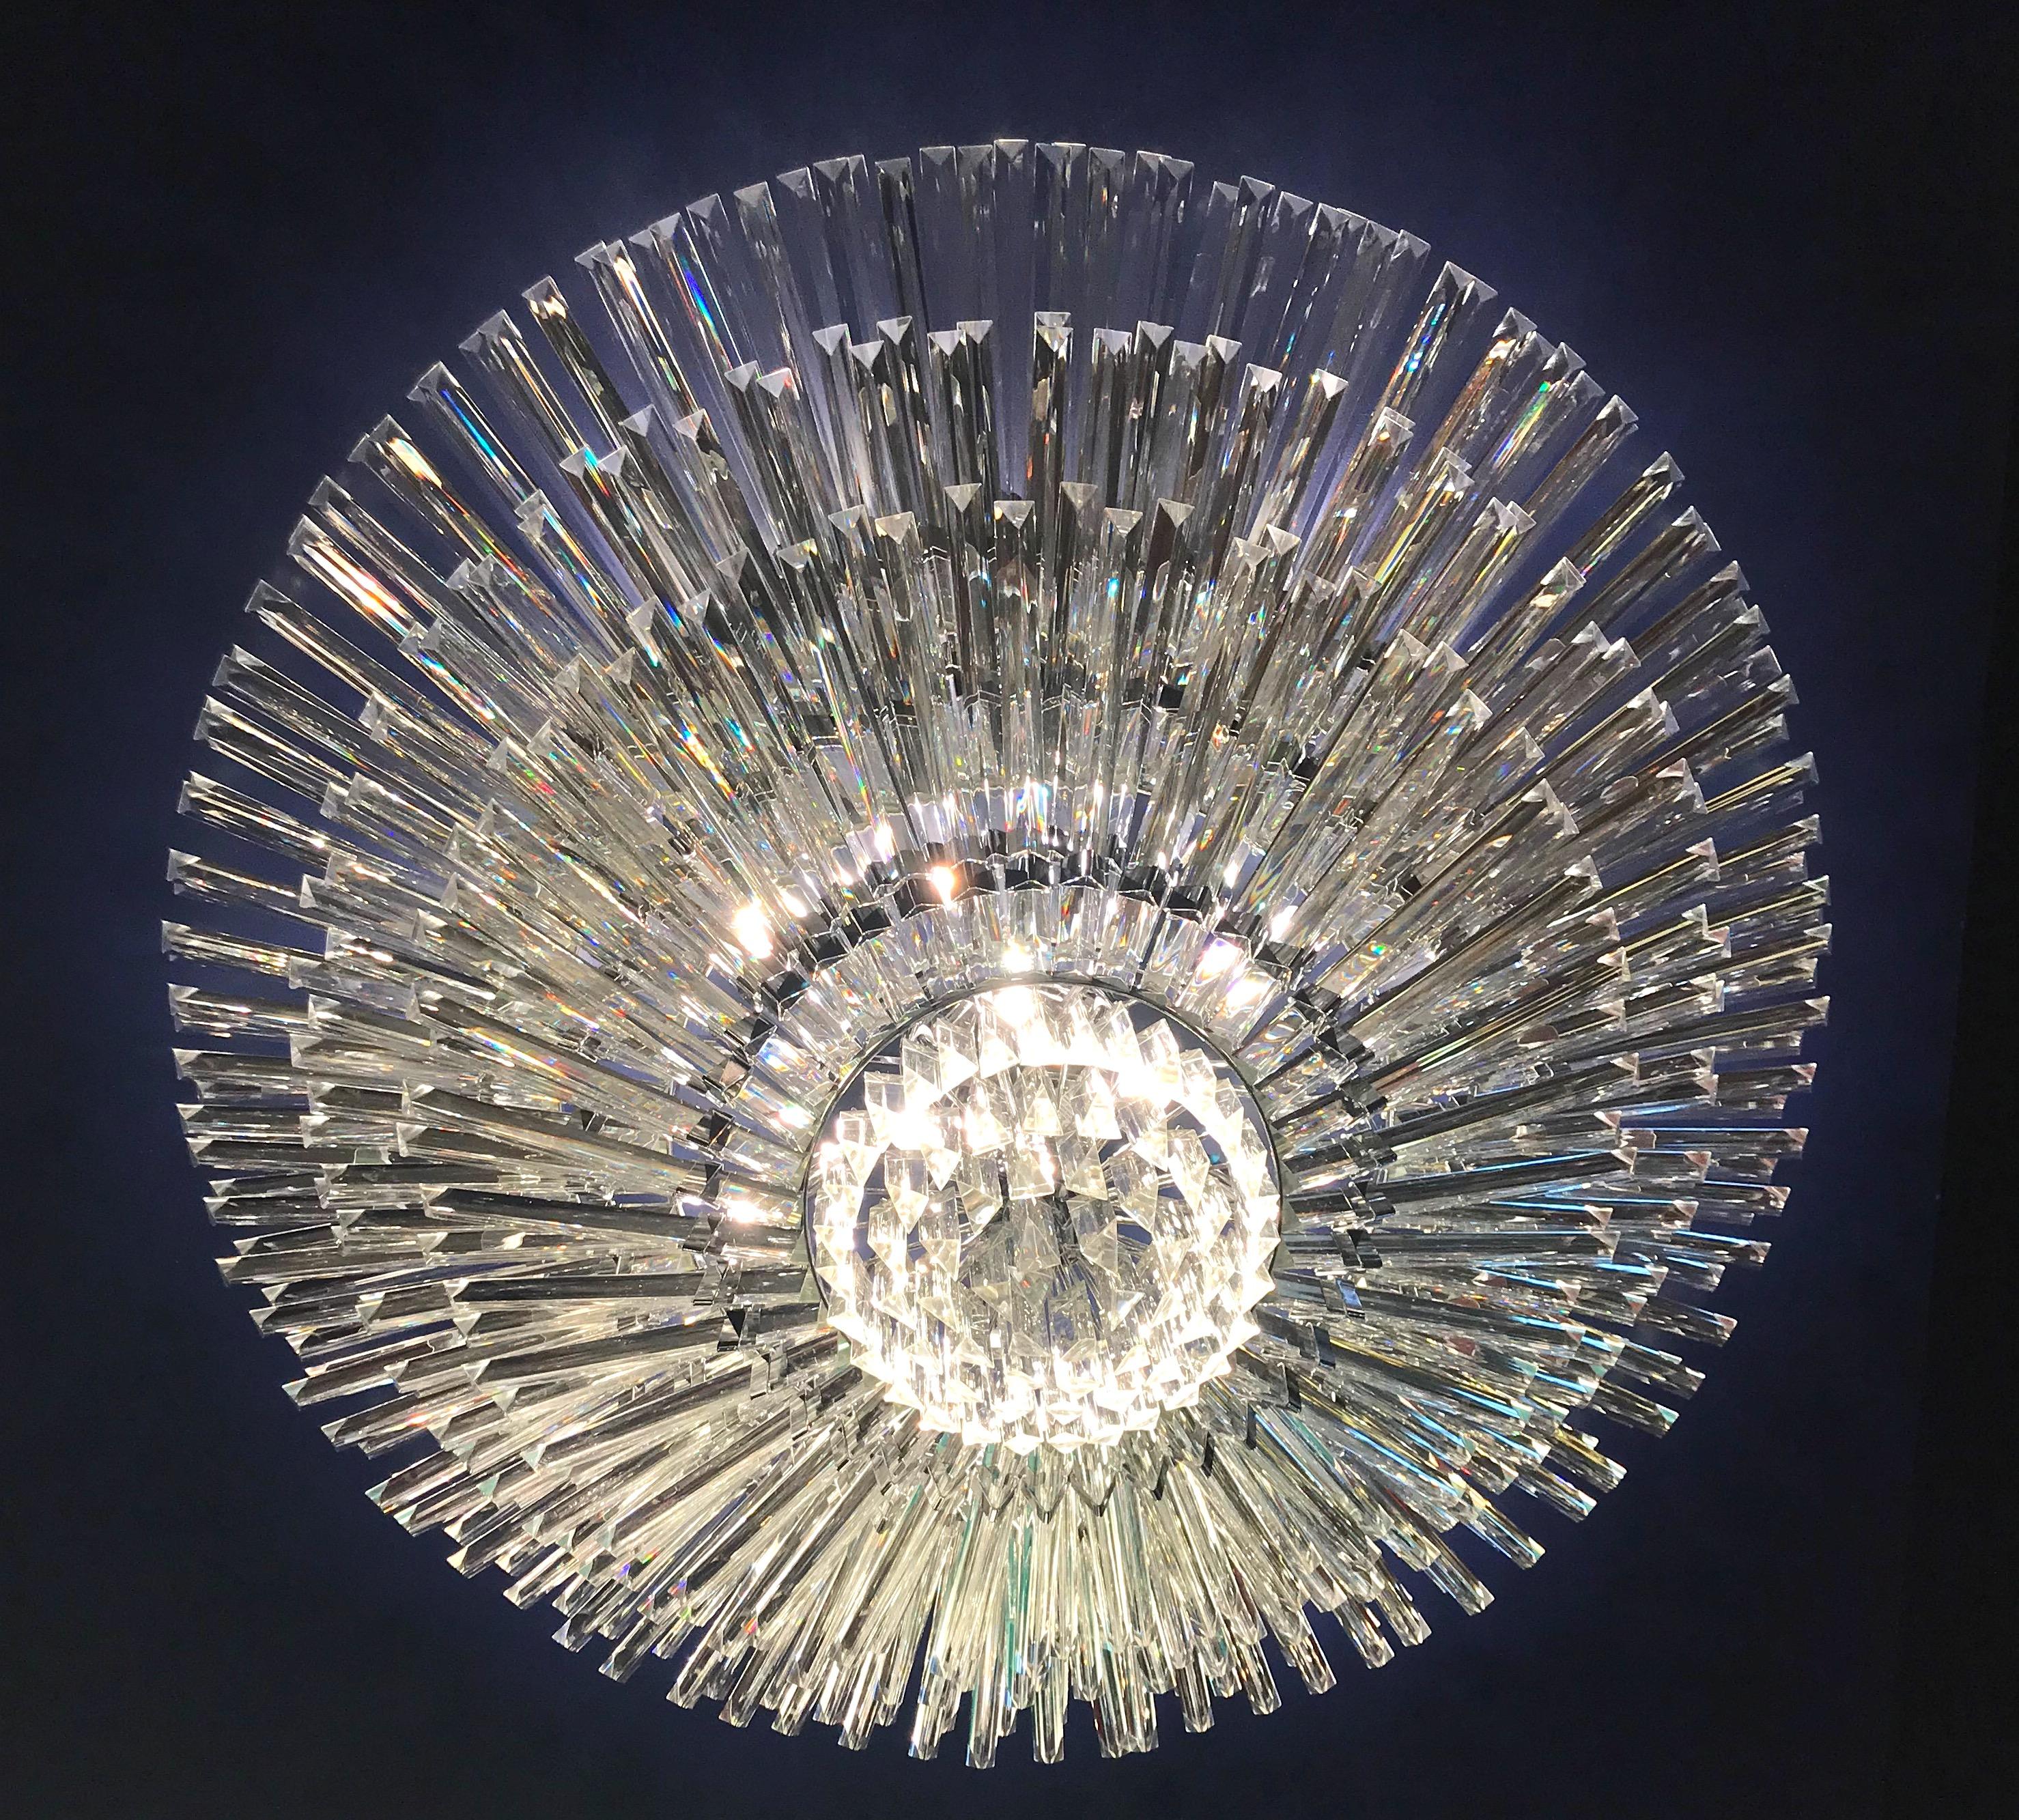 Spectacular and large ceiling light with a myriad of handmade Murano glass 